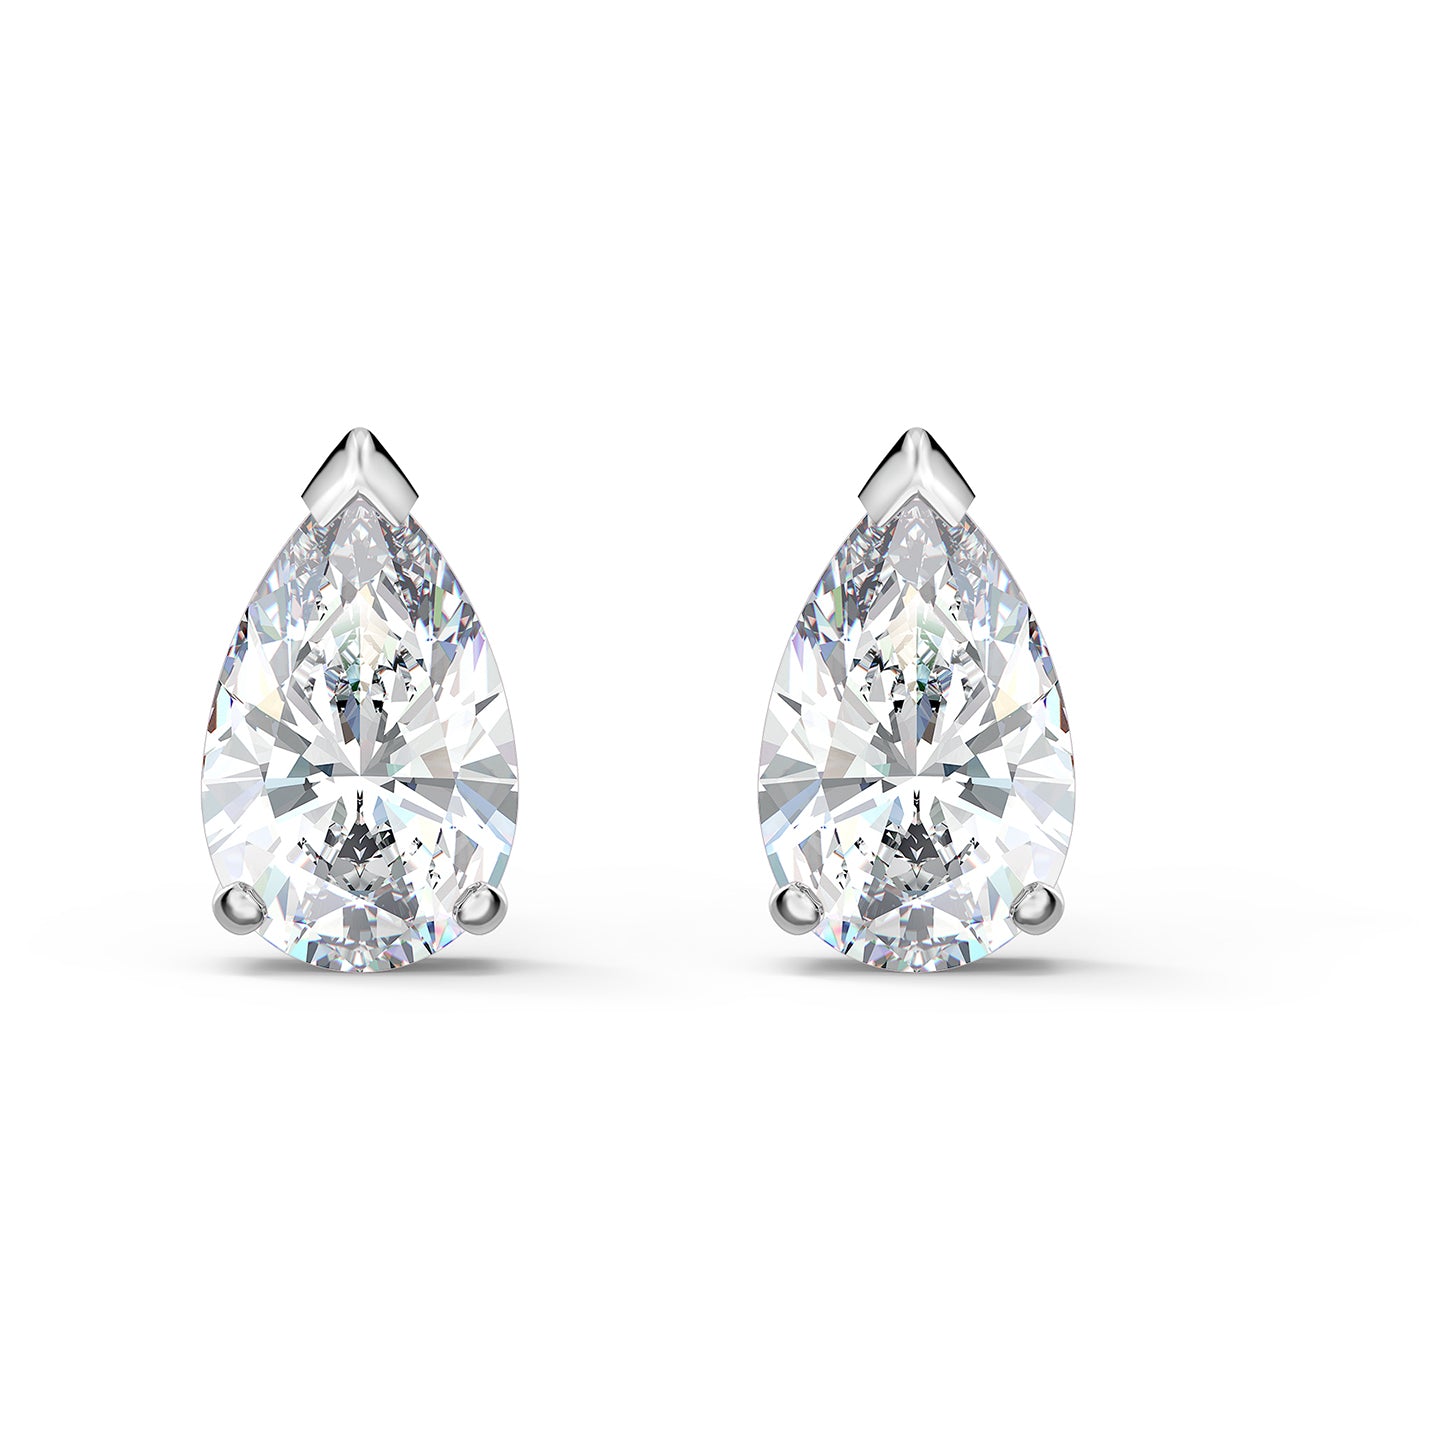 Swarovski Authentic Attract Pear Stud Pierced Earrings, White, Rhodium Plated